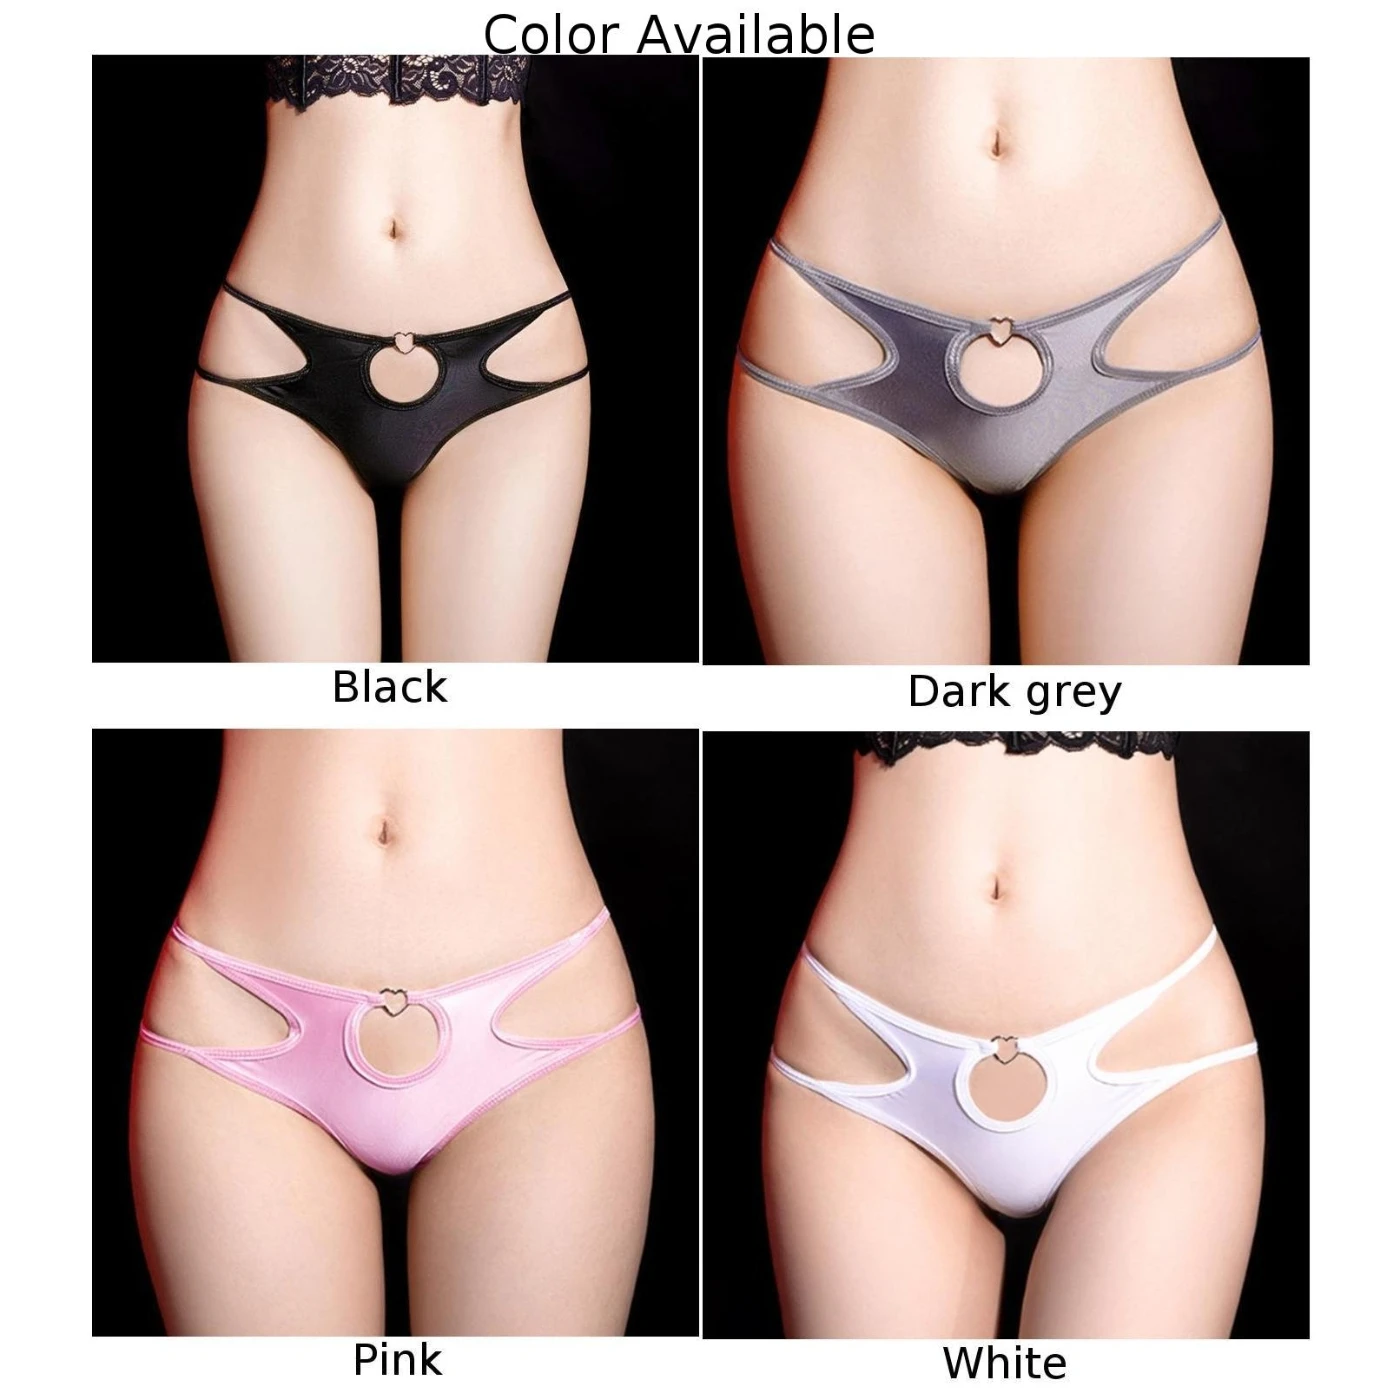 Women's Panties Hollow Out Sexy Briefs Slim Tight Lingerie See Through Glossy Thong Shiny Silky Underwear Sensual Nightwear